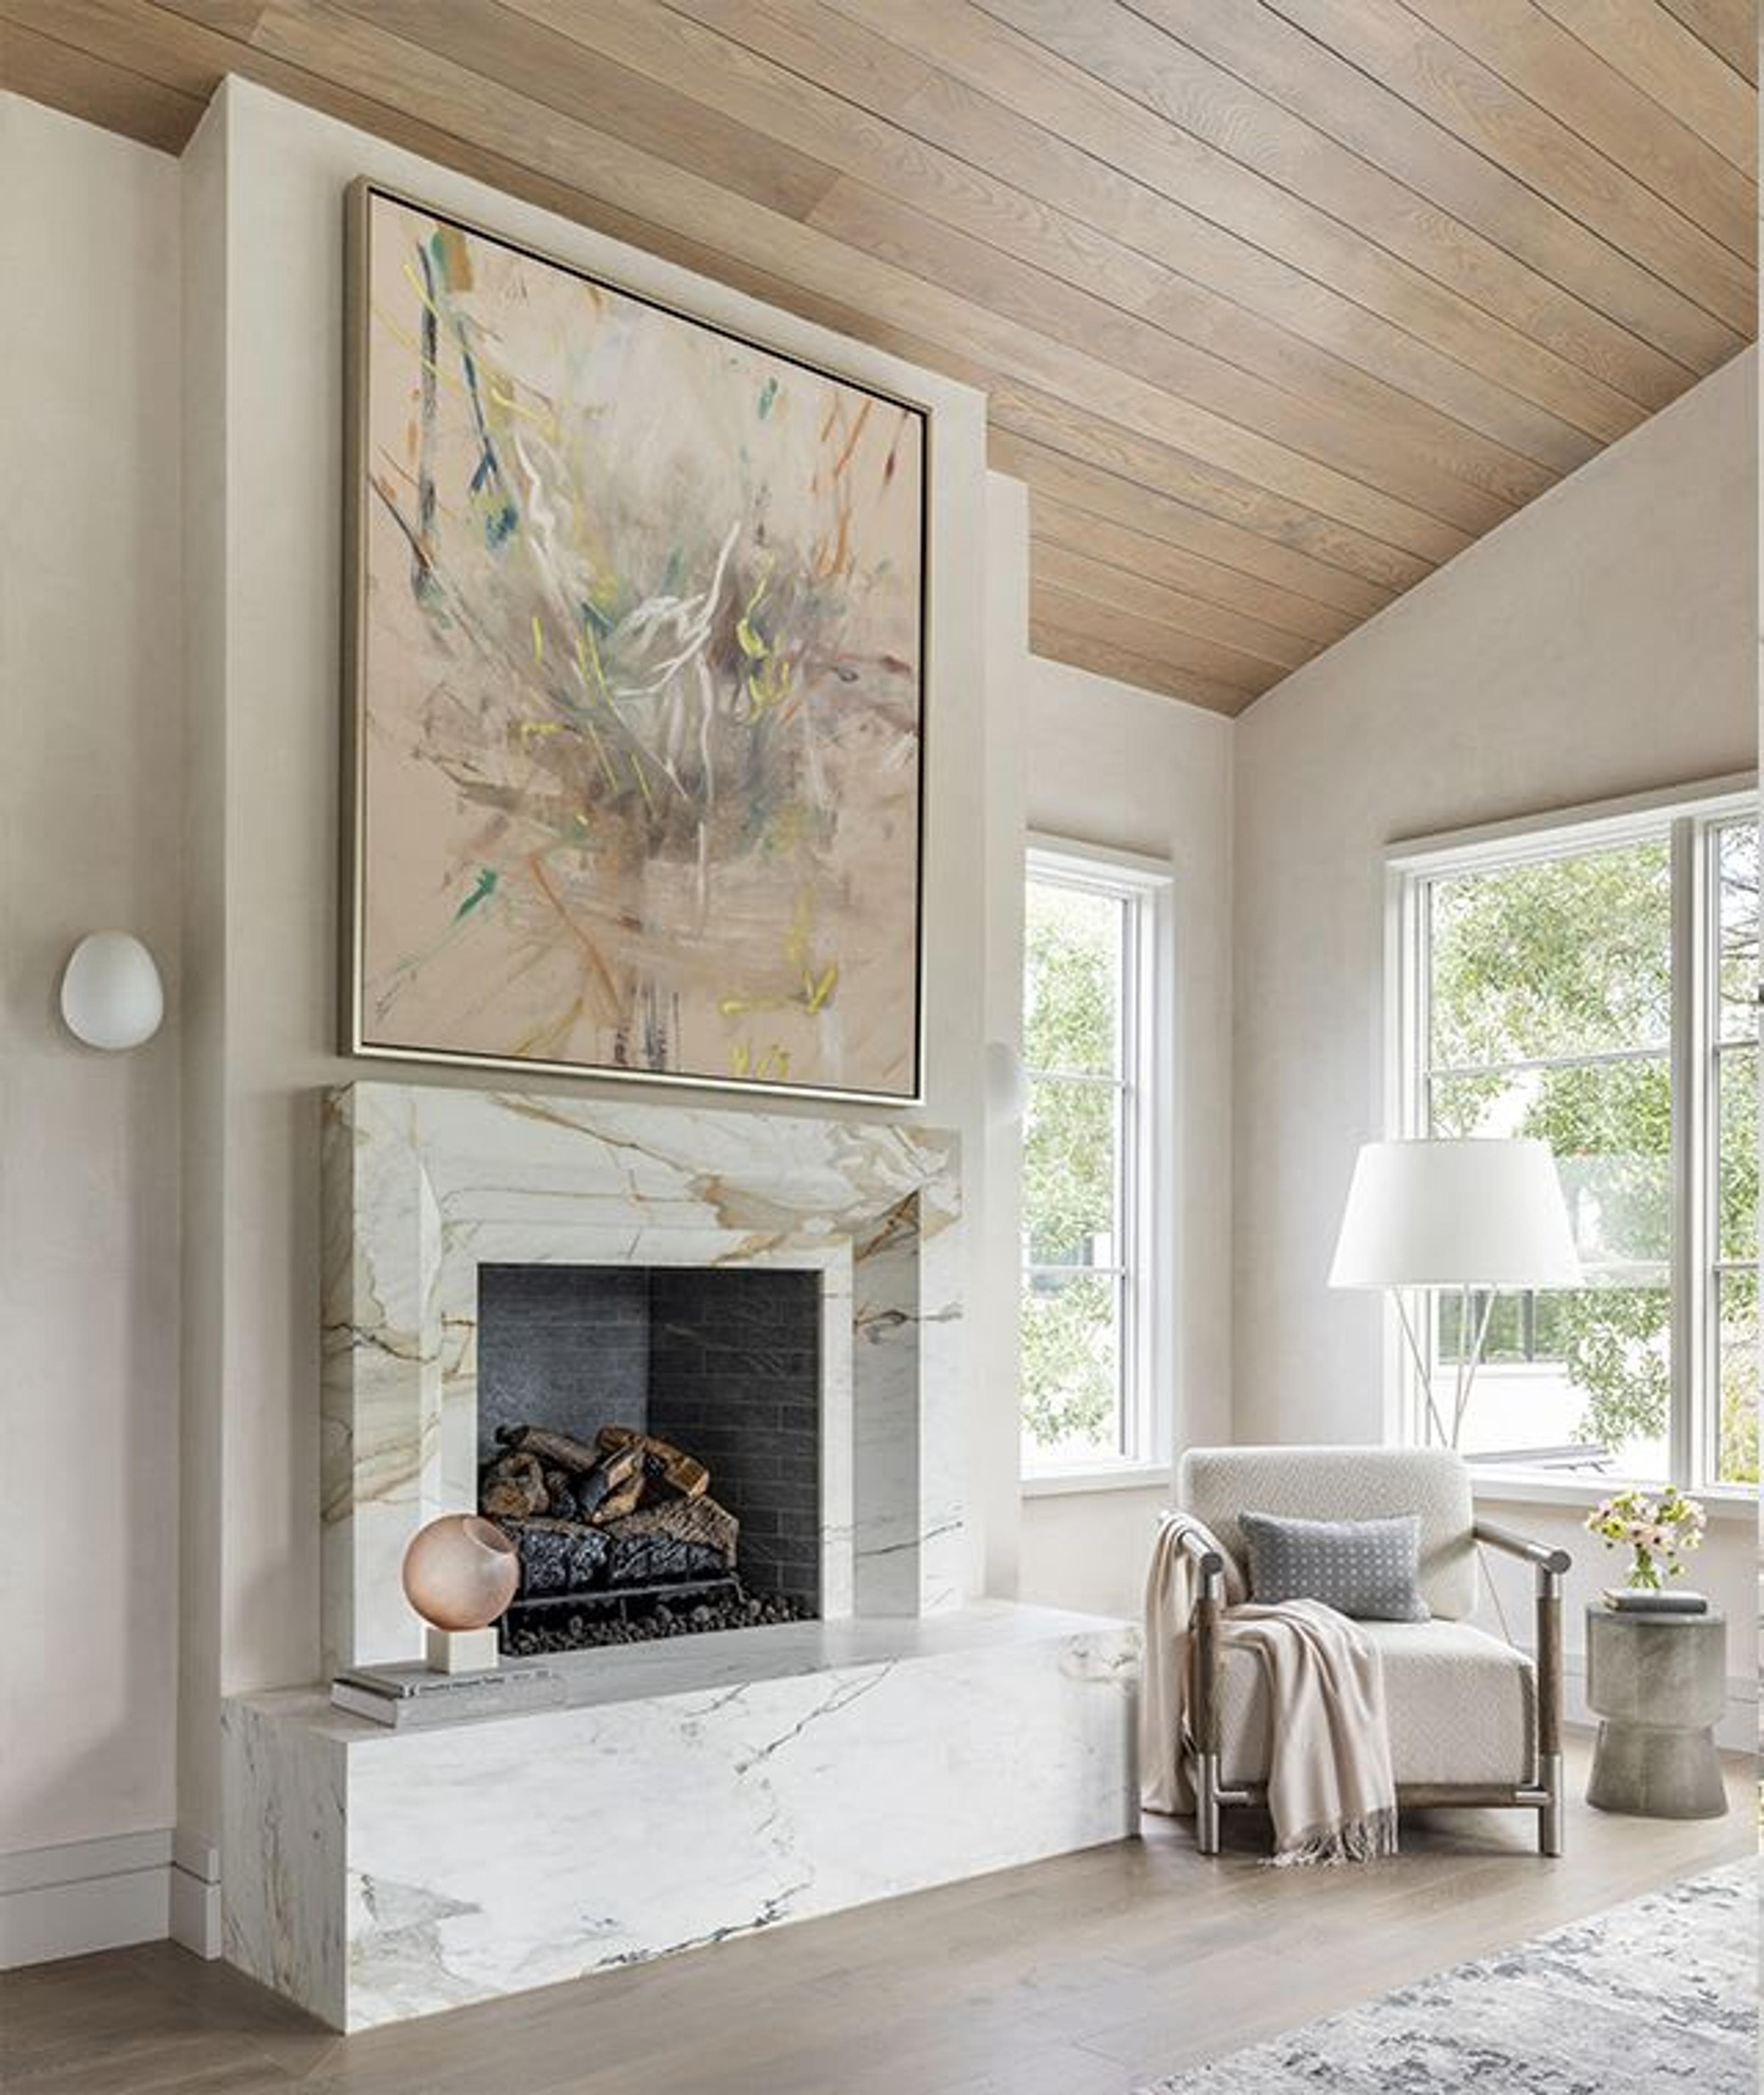 The vaulted wood ceiling in this primary retreat gives way to plaster walls that frame a massive fireplace custom-designed to lend drama and dimension. An abstract art piece provides visual cues that inspire the surrounding decor.